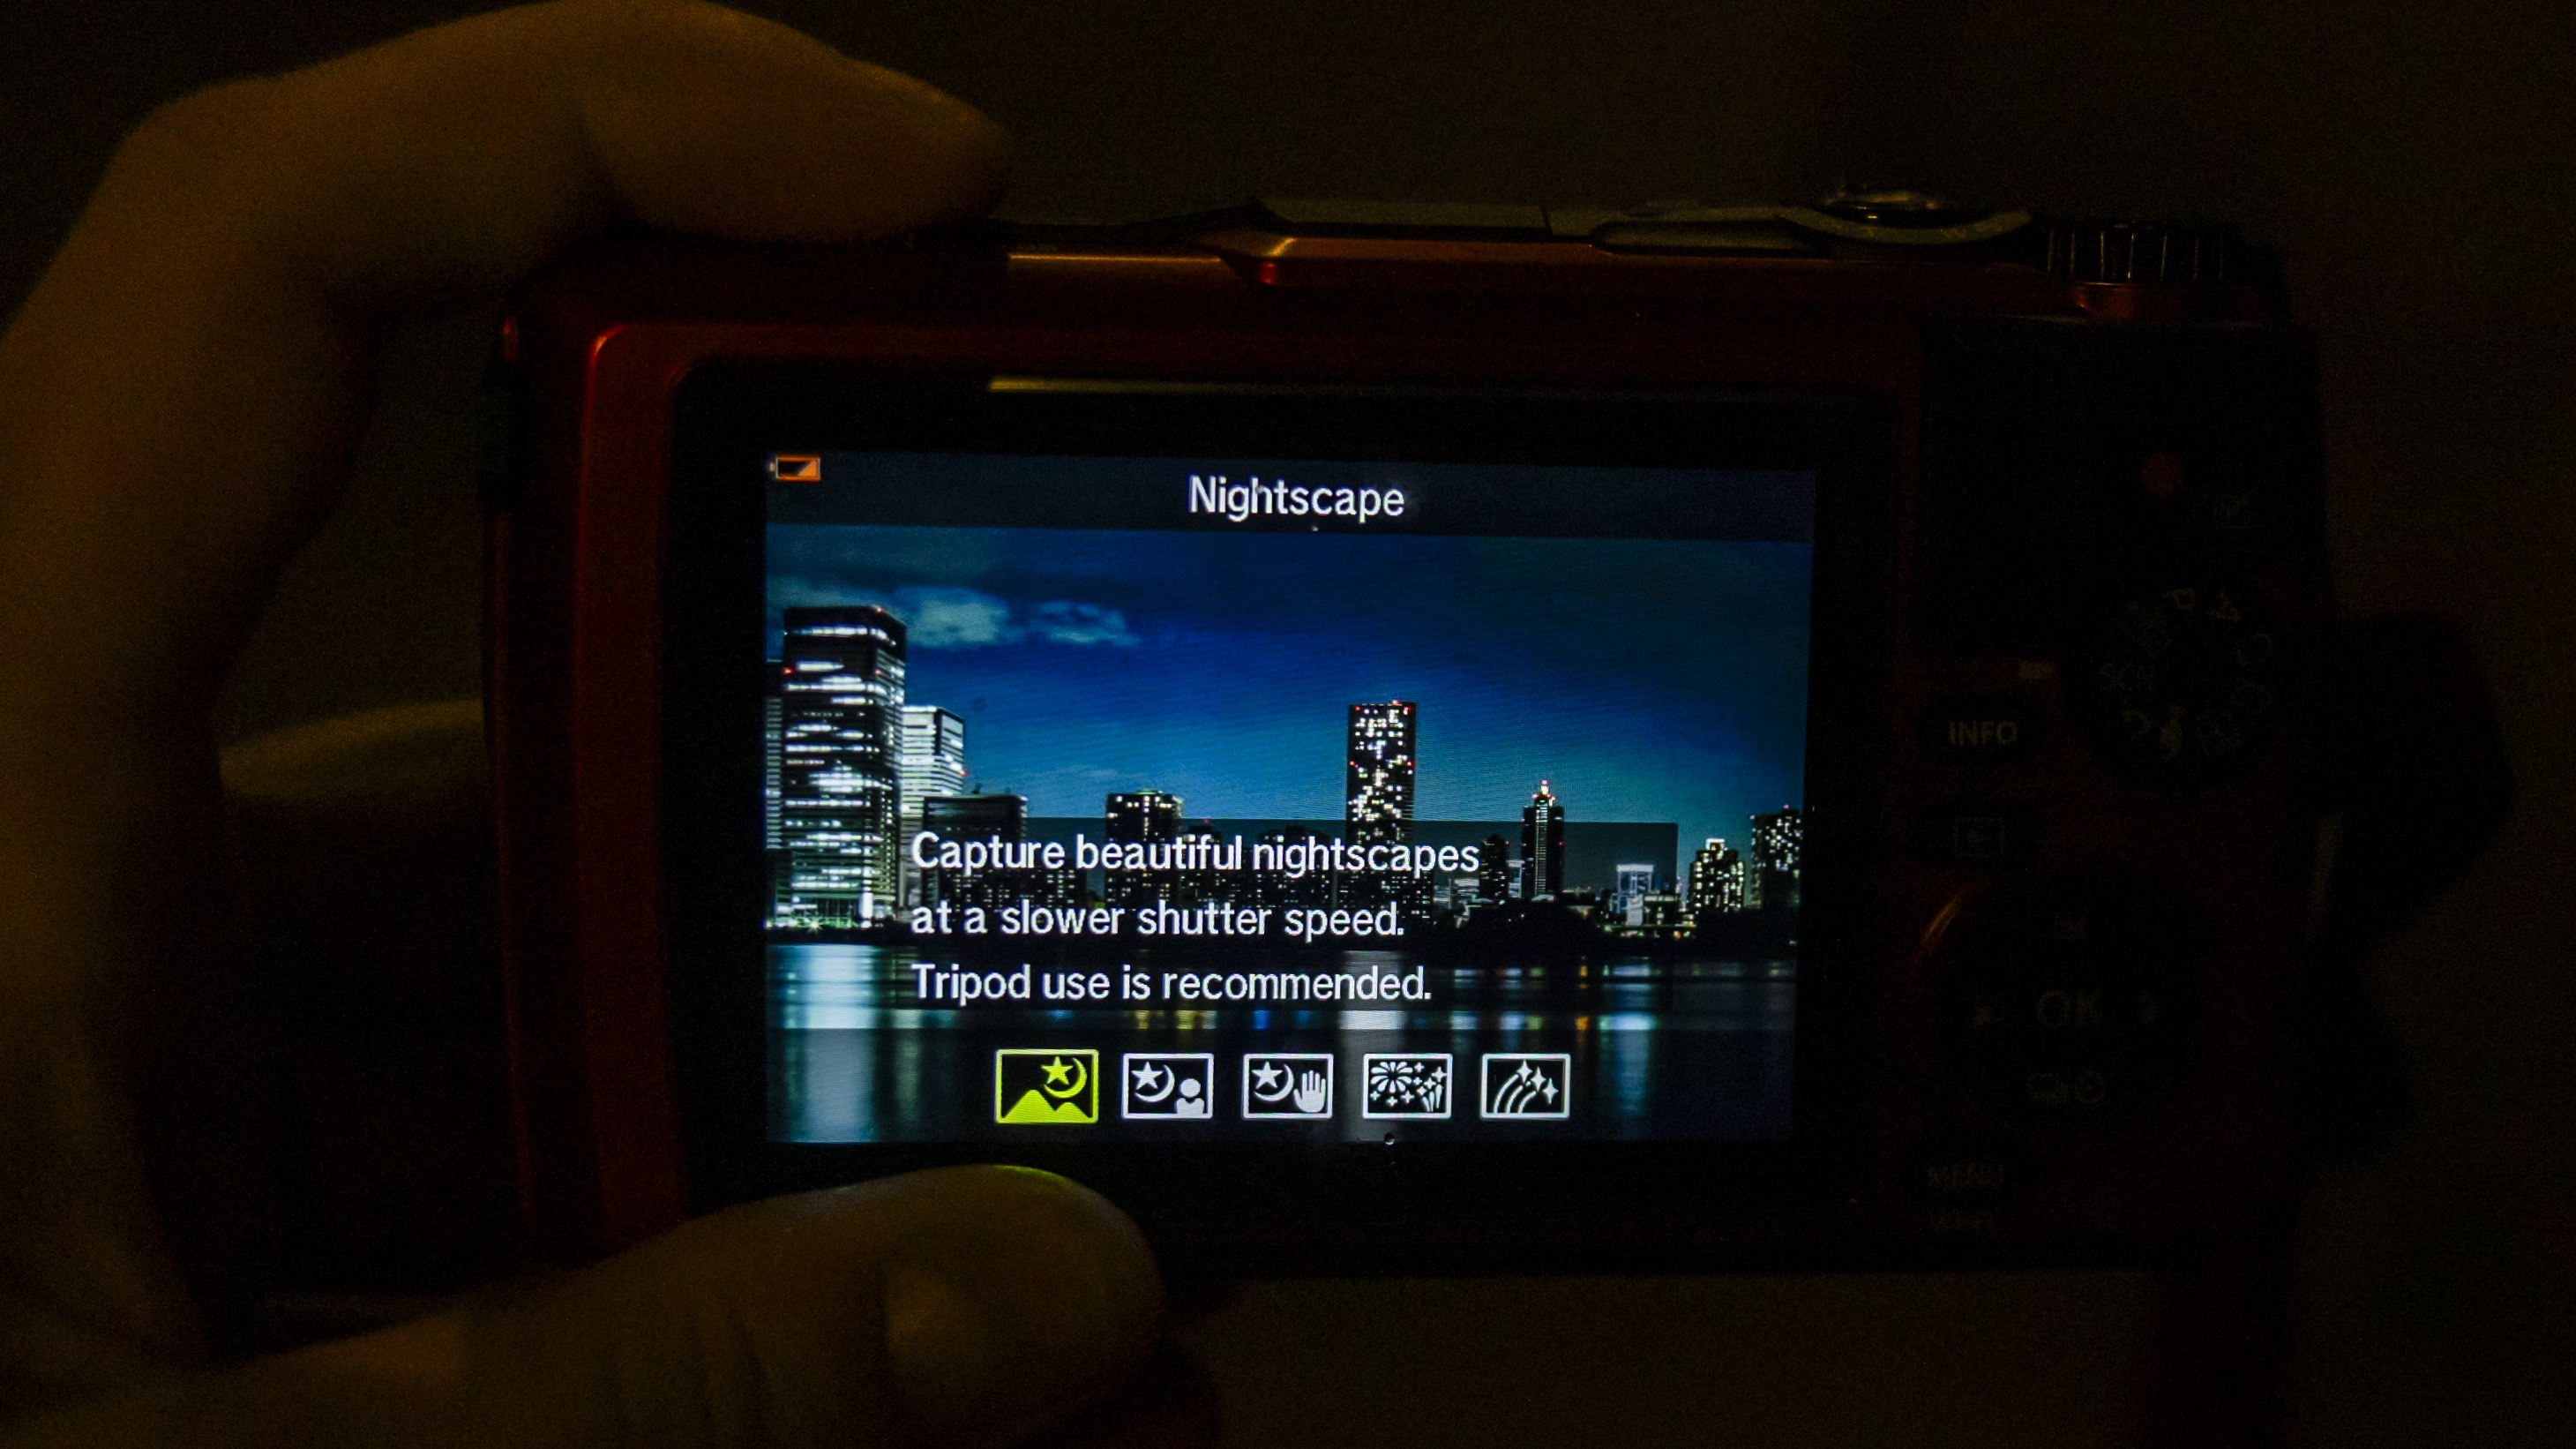 The Nightscape scene mode on the OM System Tough TG-7 camera